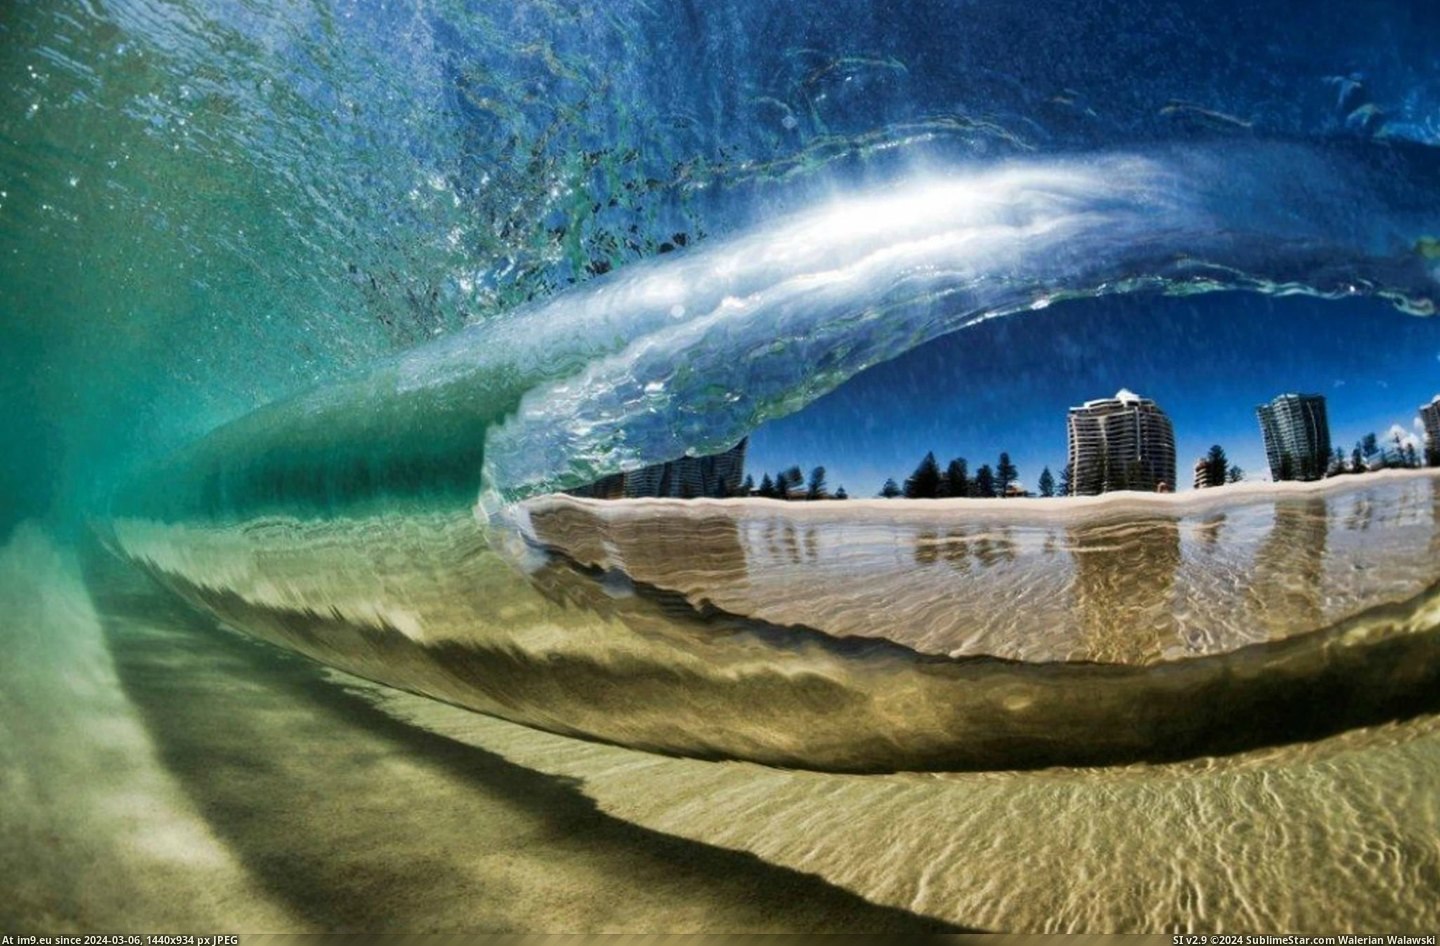  #Wave  [Pics] A view from under the wave. Pic. (Изображение из альбом My r/PICS favs))